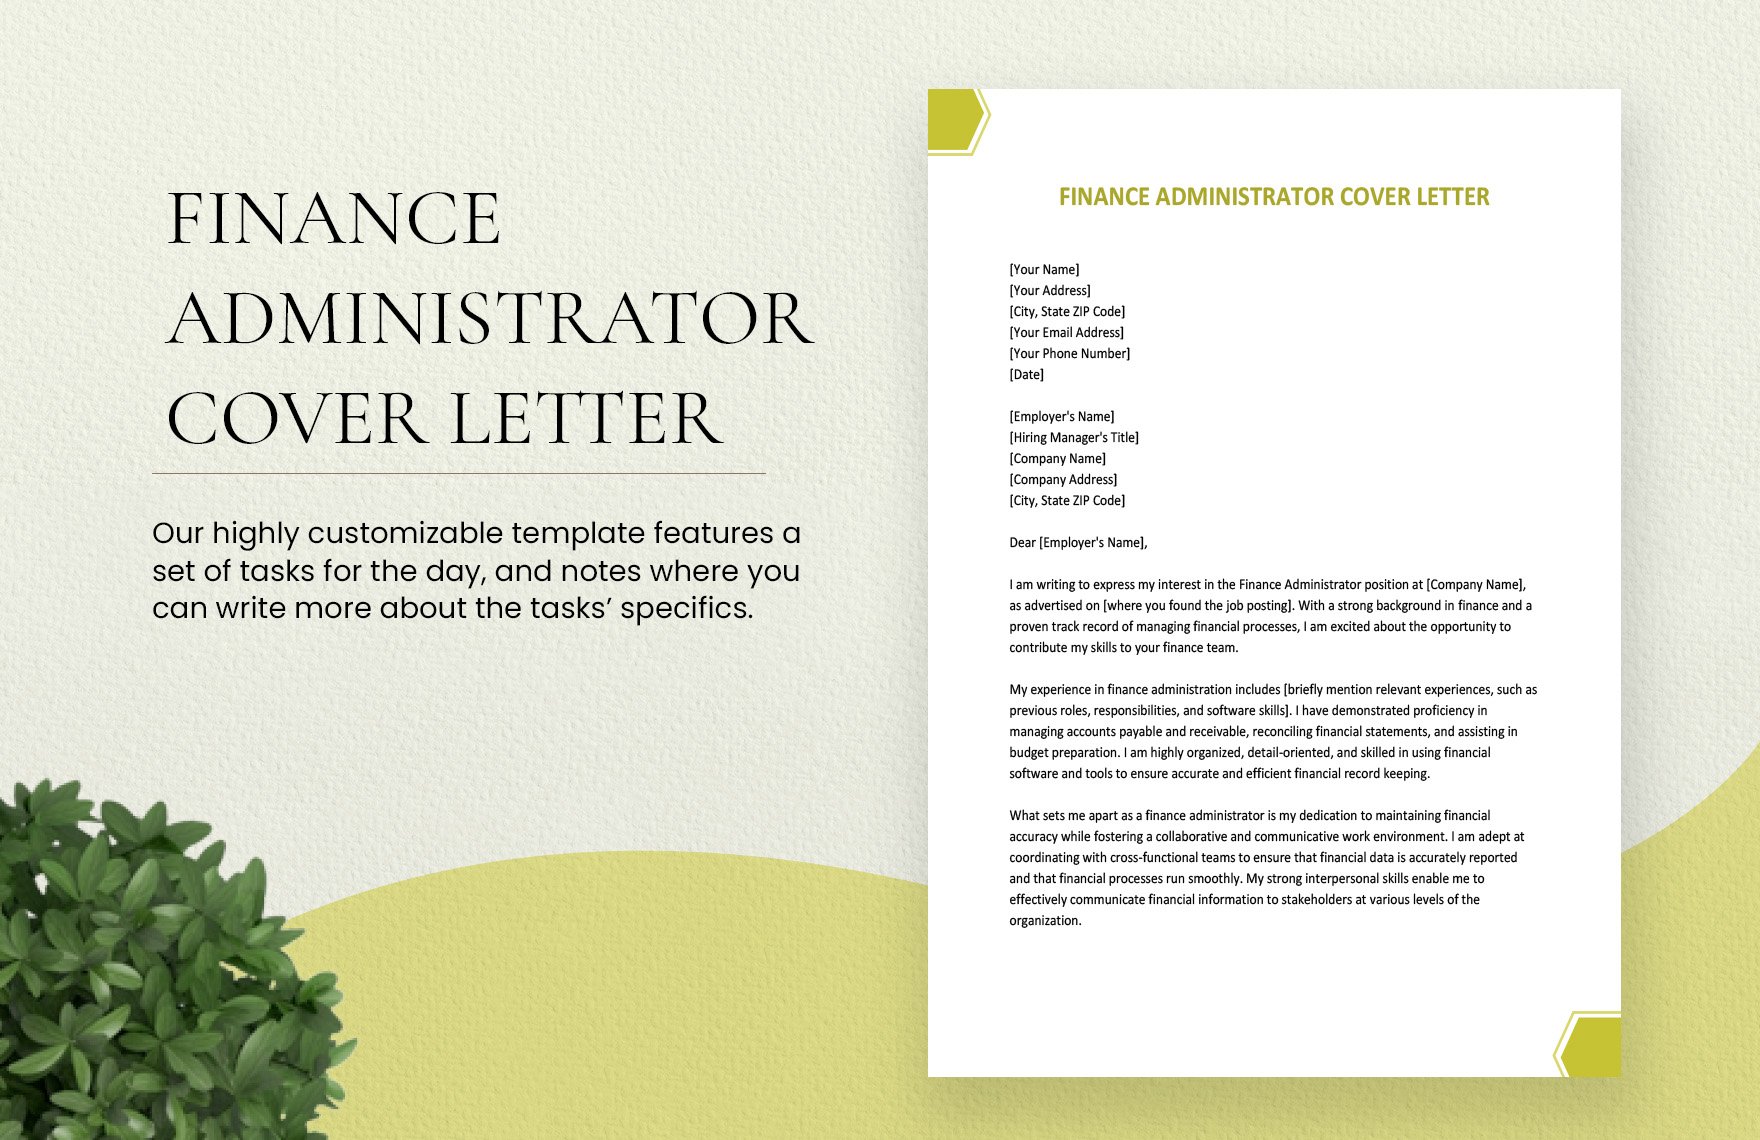 Finance Administrator Cover Letter in Word, Google Docs